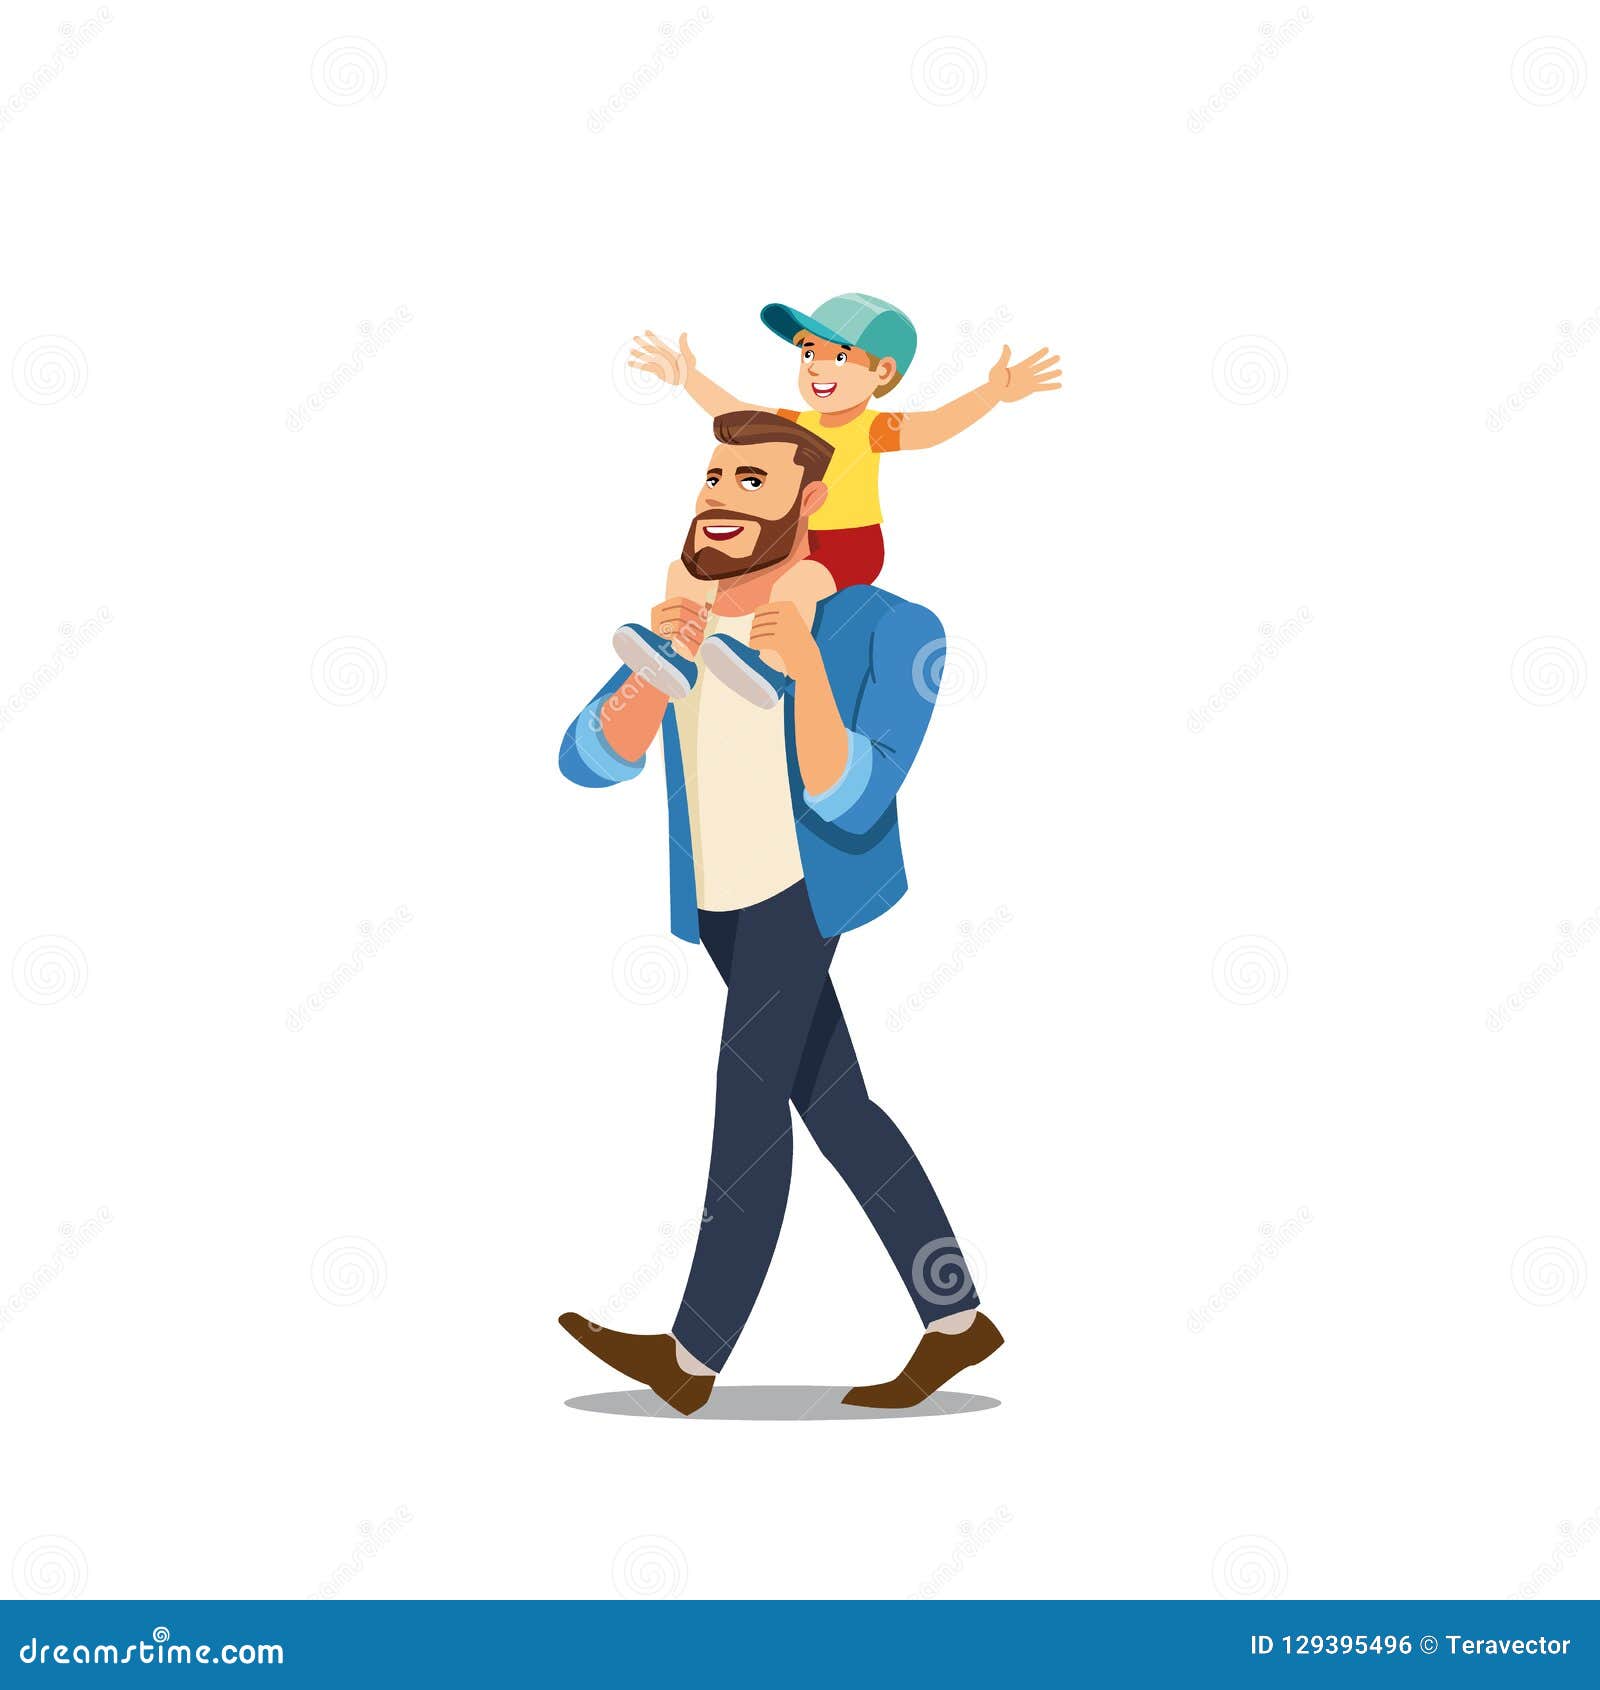 father riding son on shoulders cartoon 